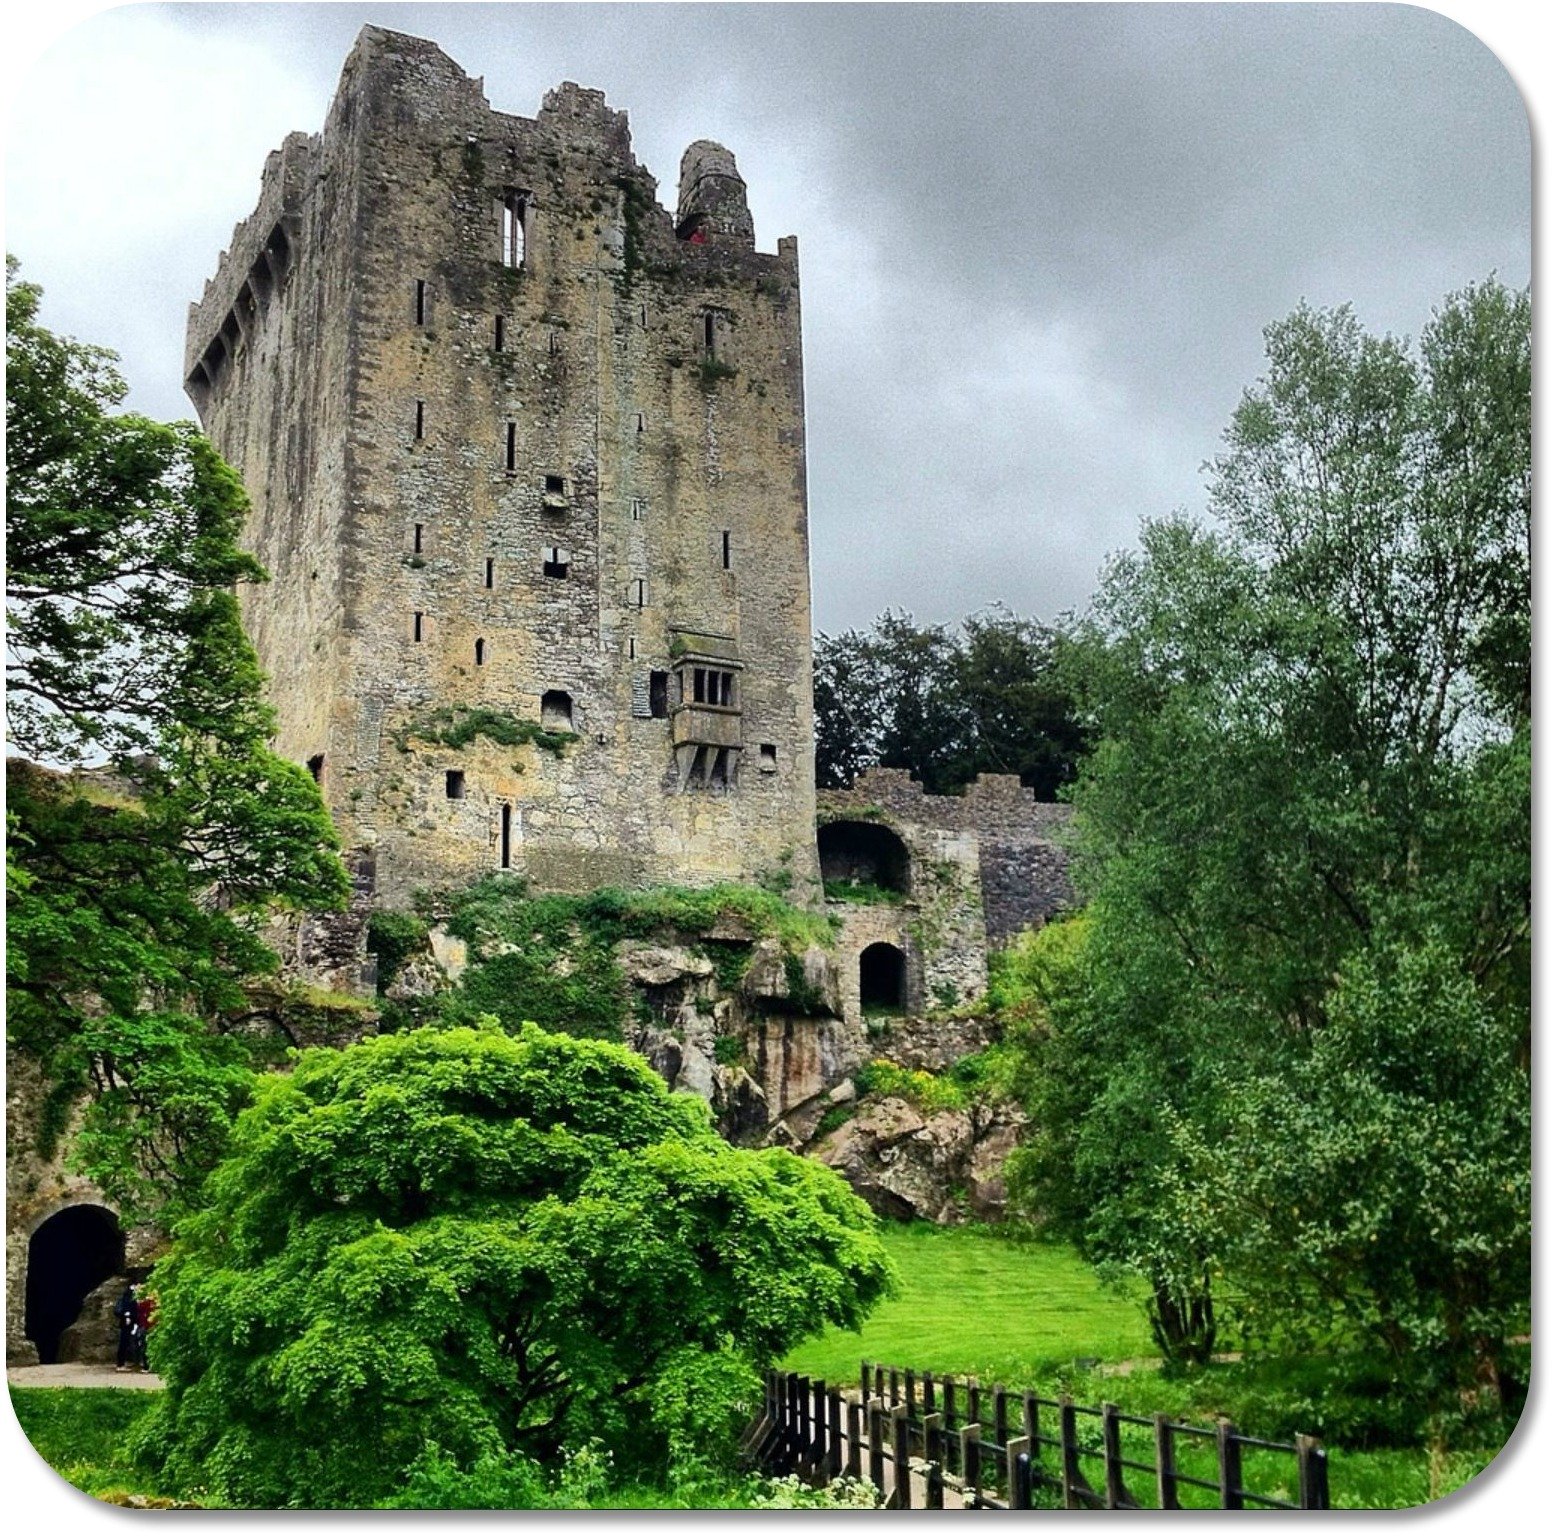 Blarney Castle - home of the world-famous Blarney Stone!